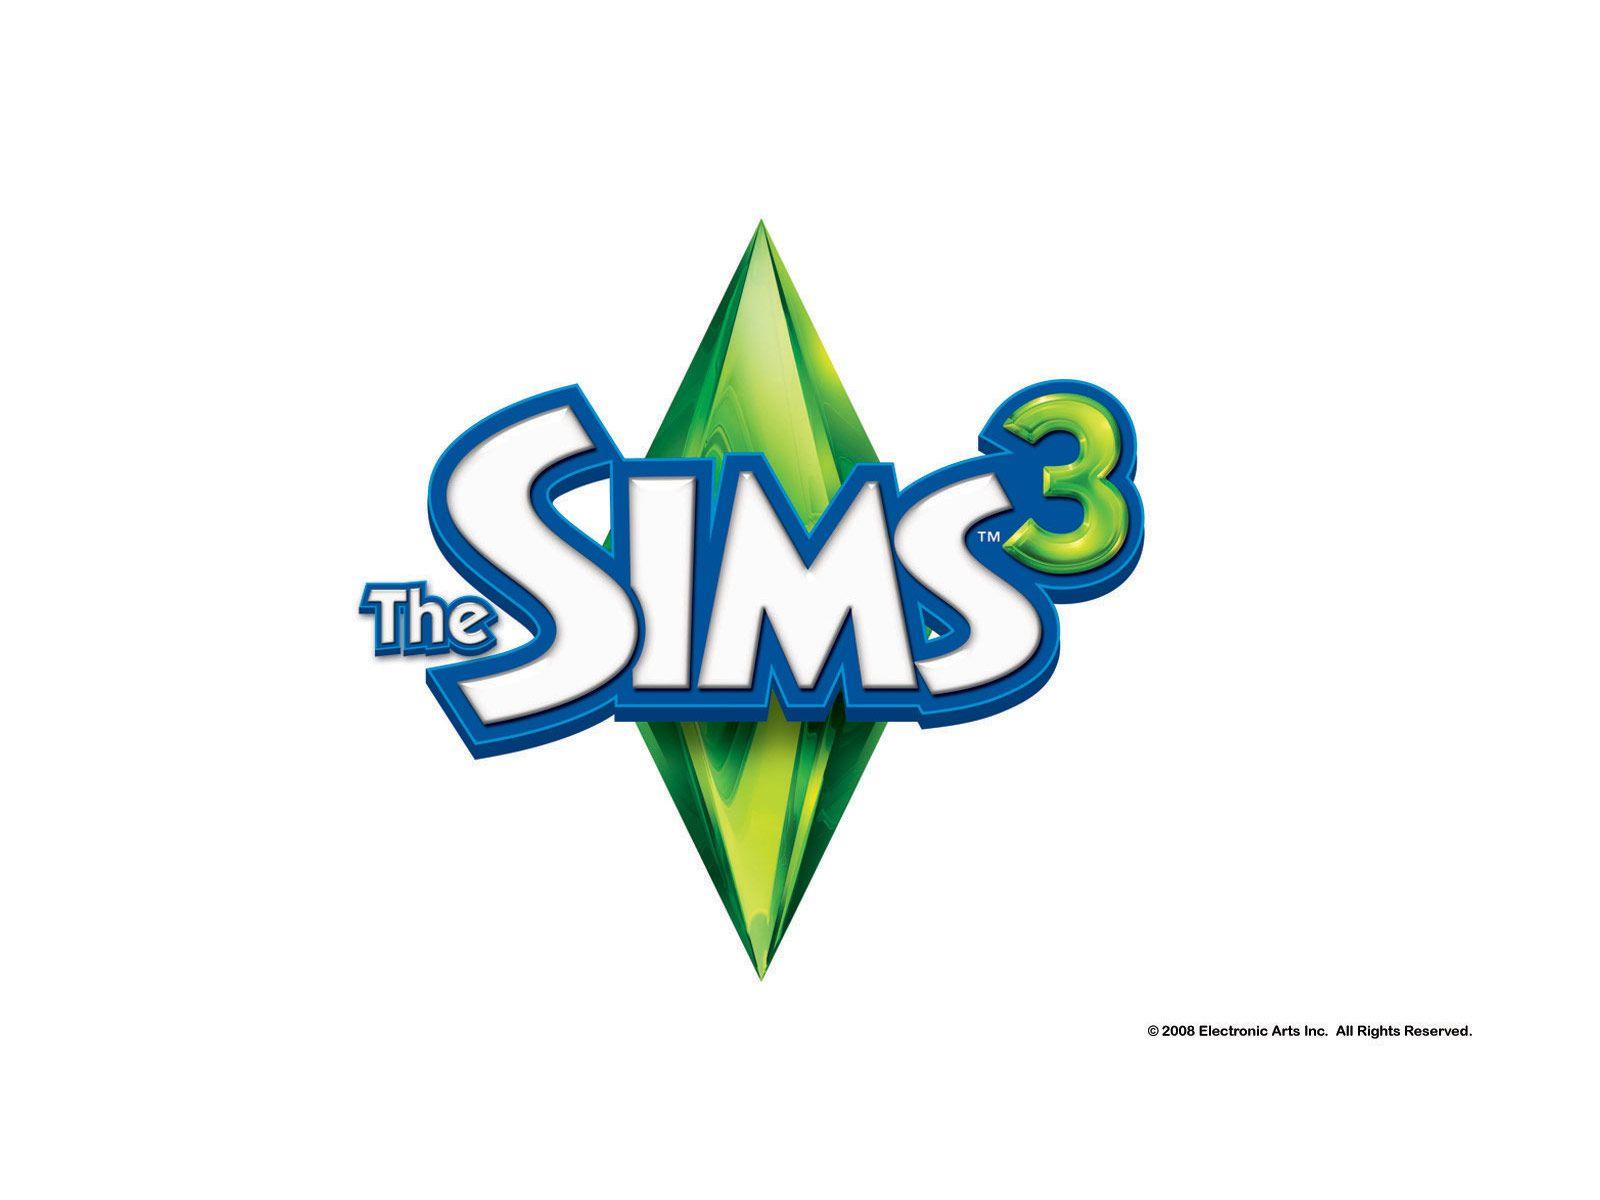 The Sims 3 Game Wallpaper Sims III Game Wallpaper